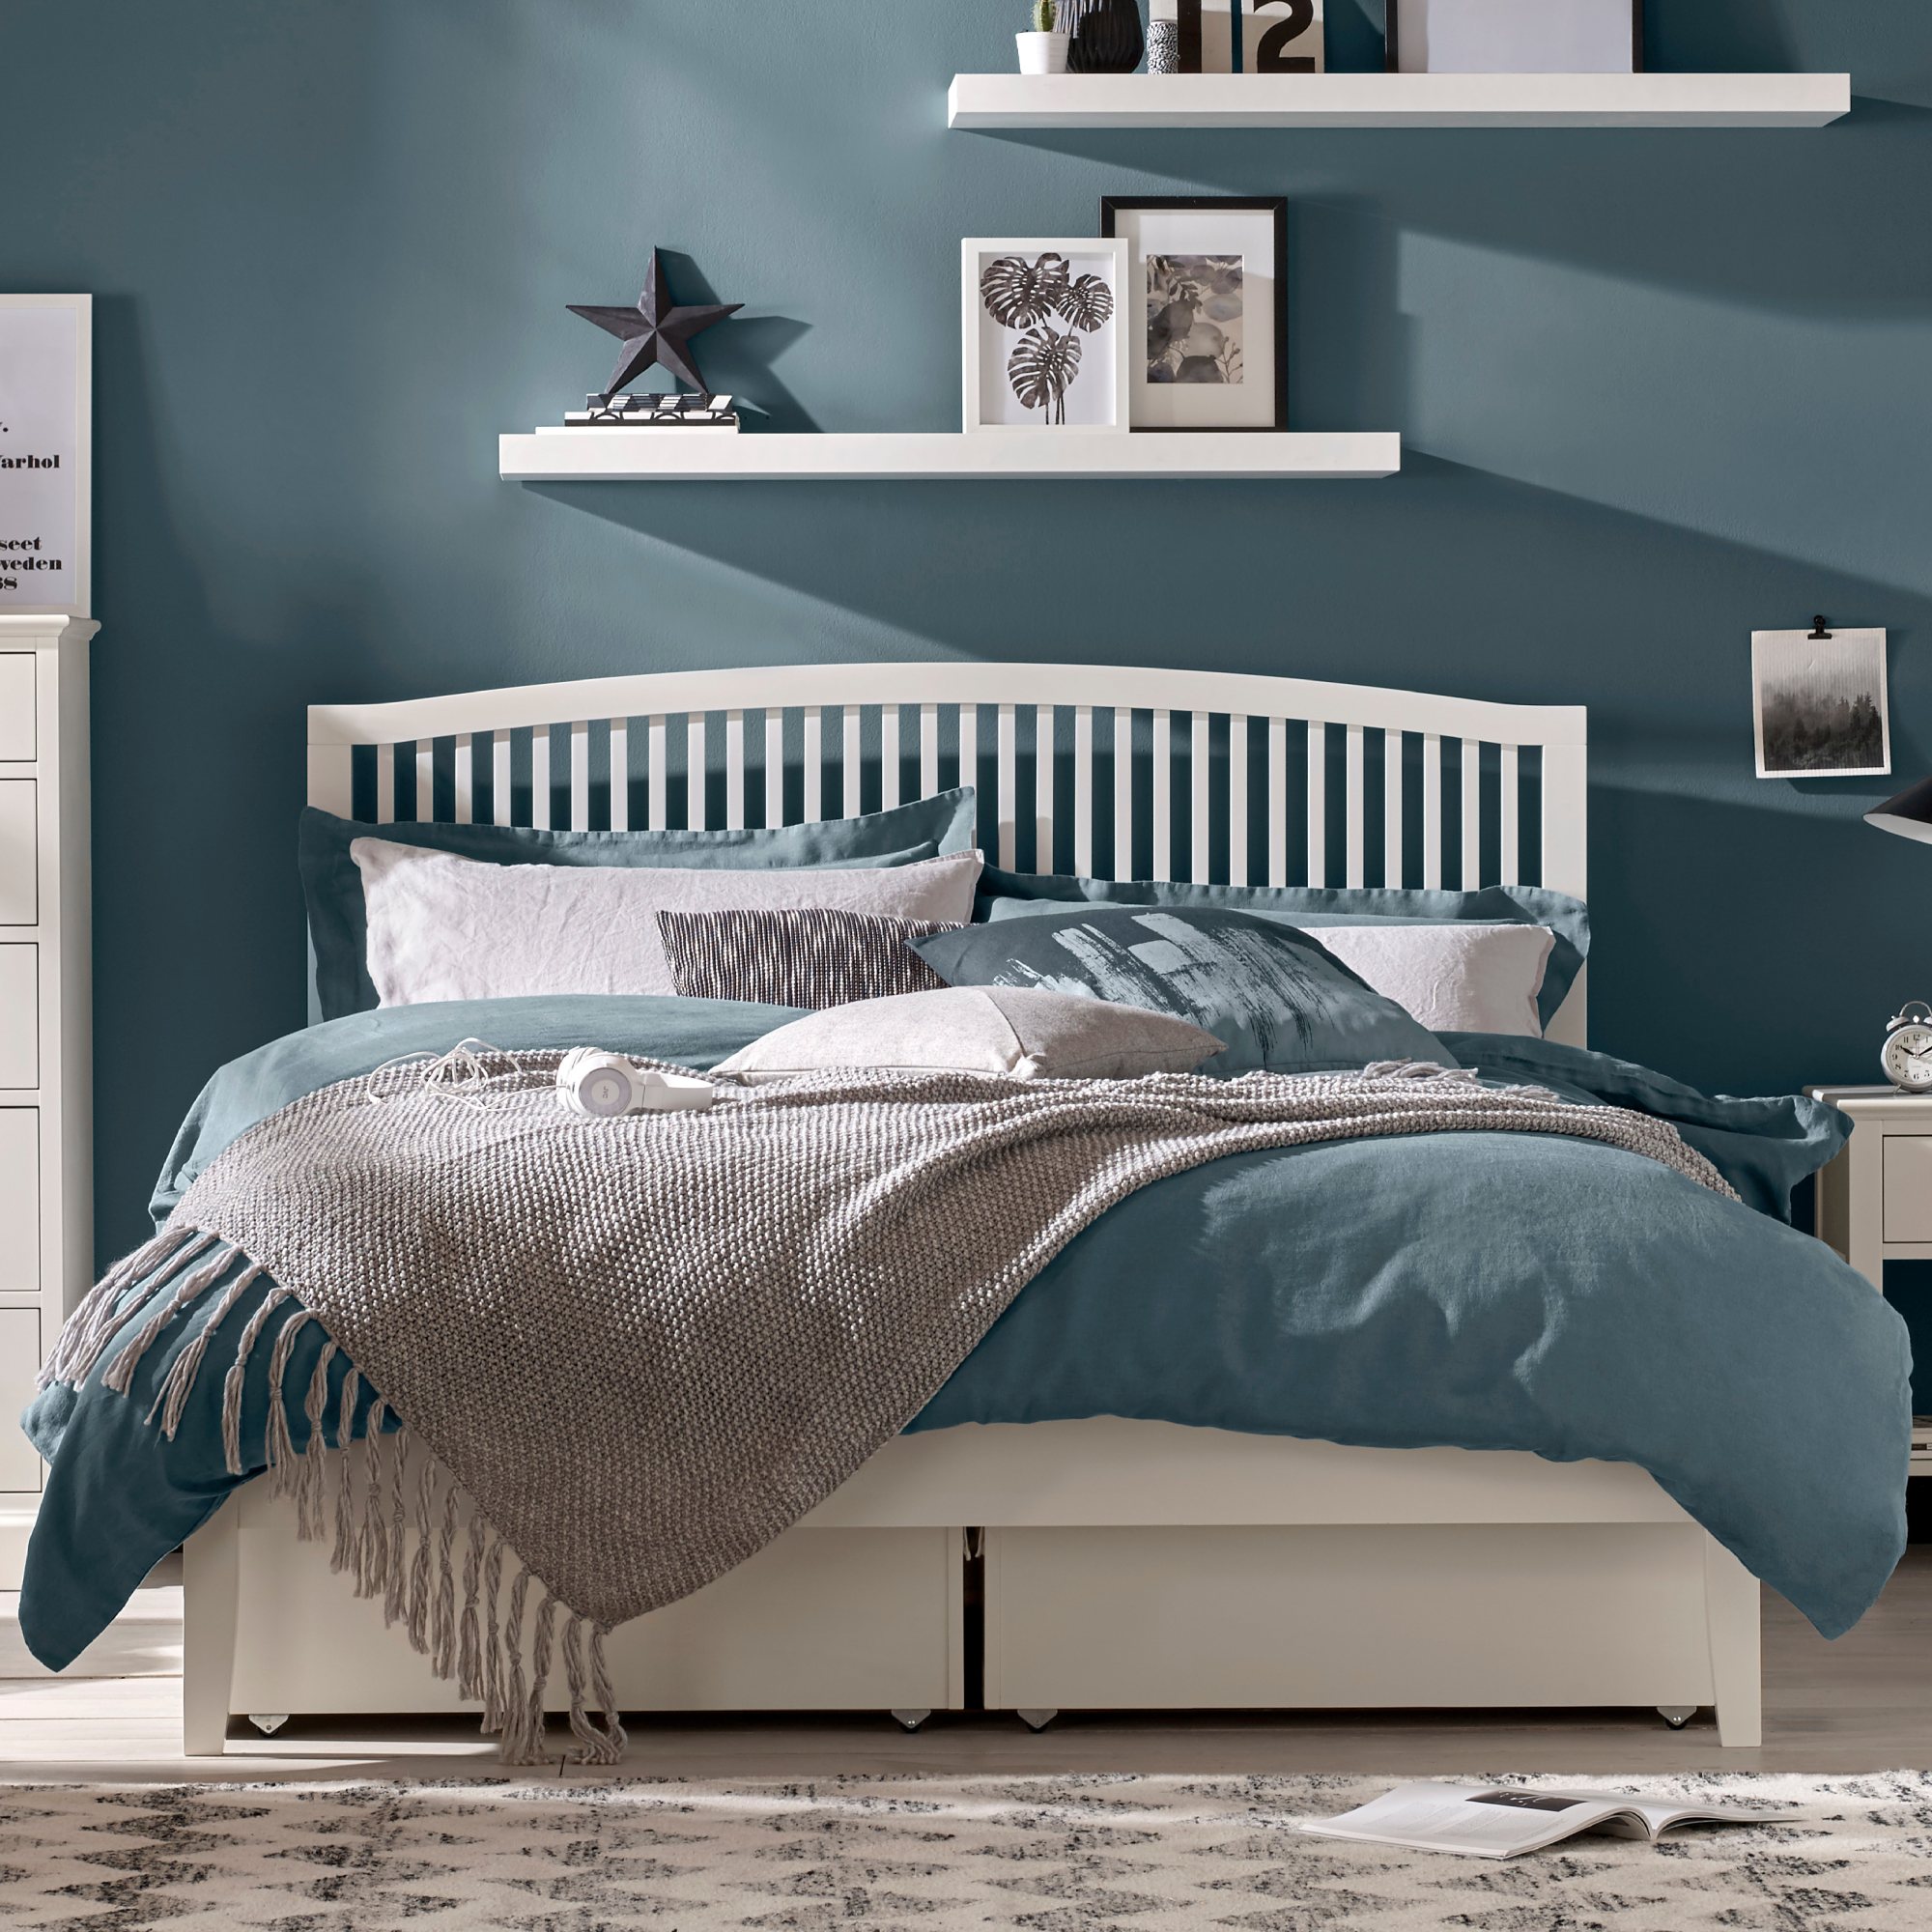 Palmer White Slatted Bedstead Double 135cm